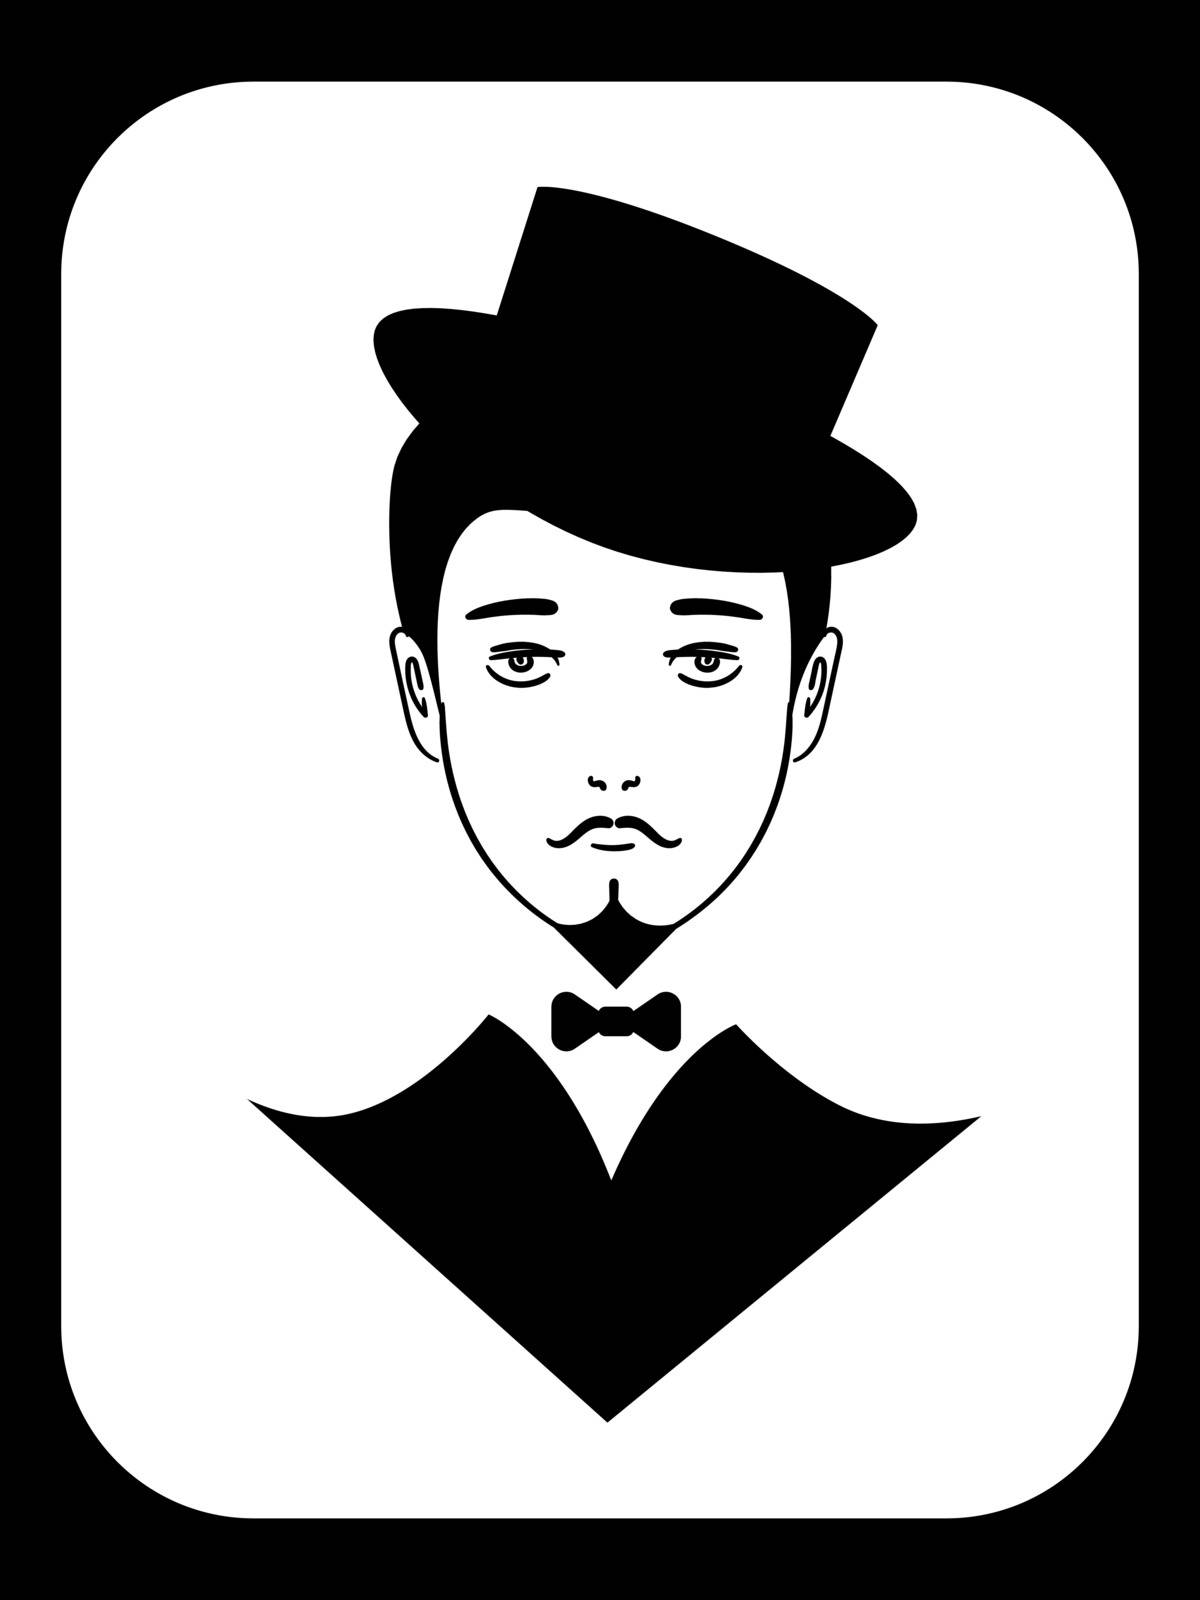 Black and white icon with vintage gentleman by paranoido